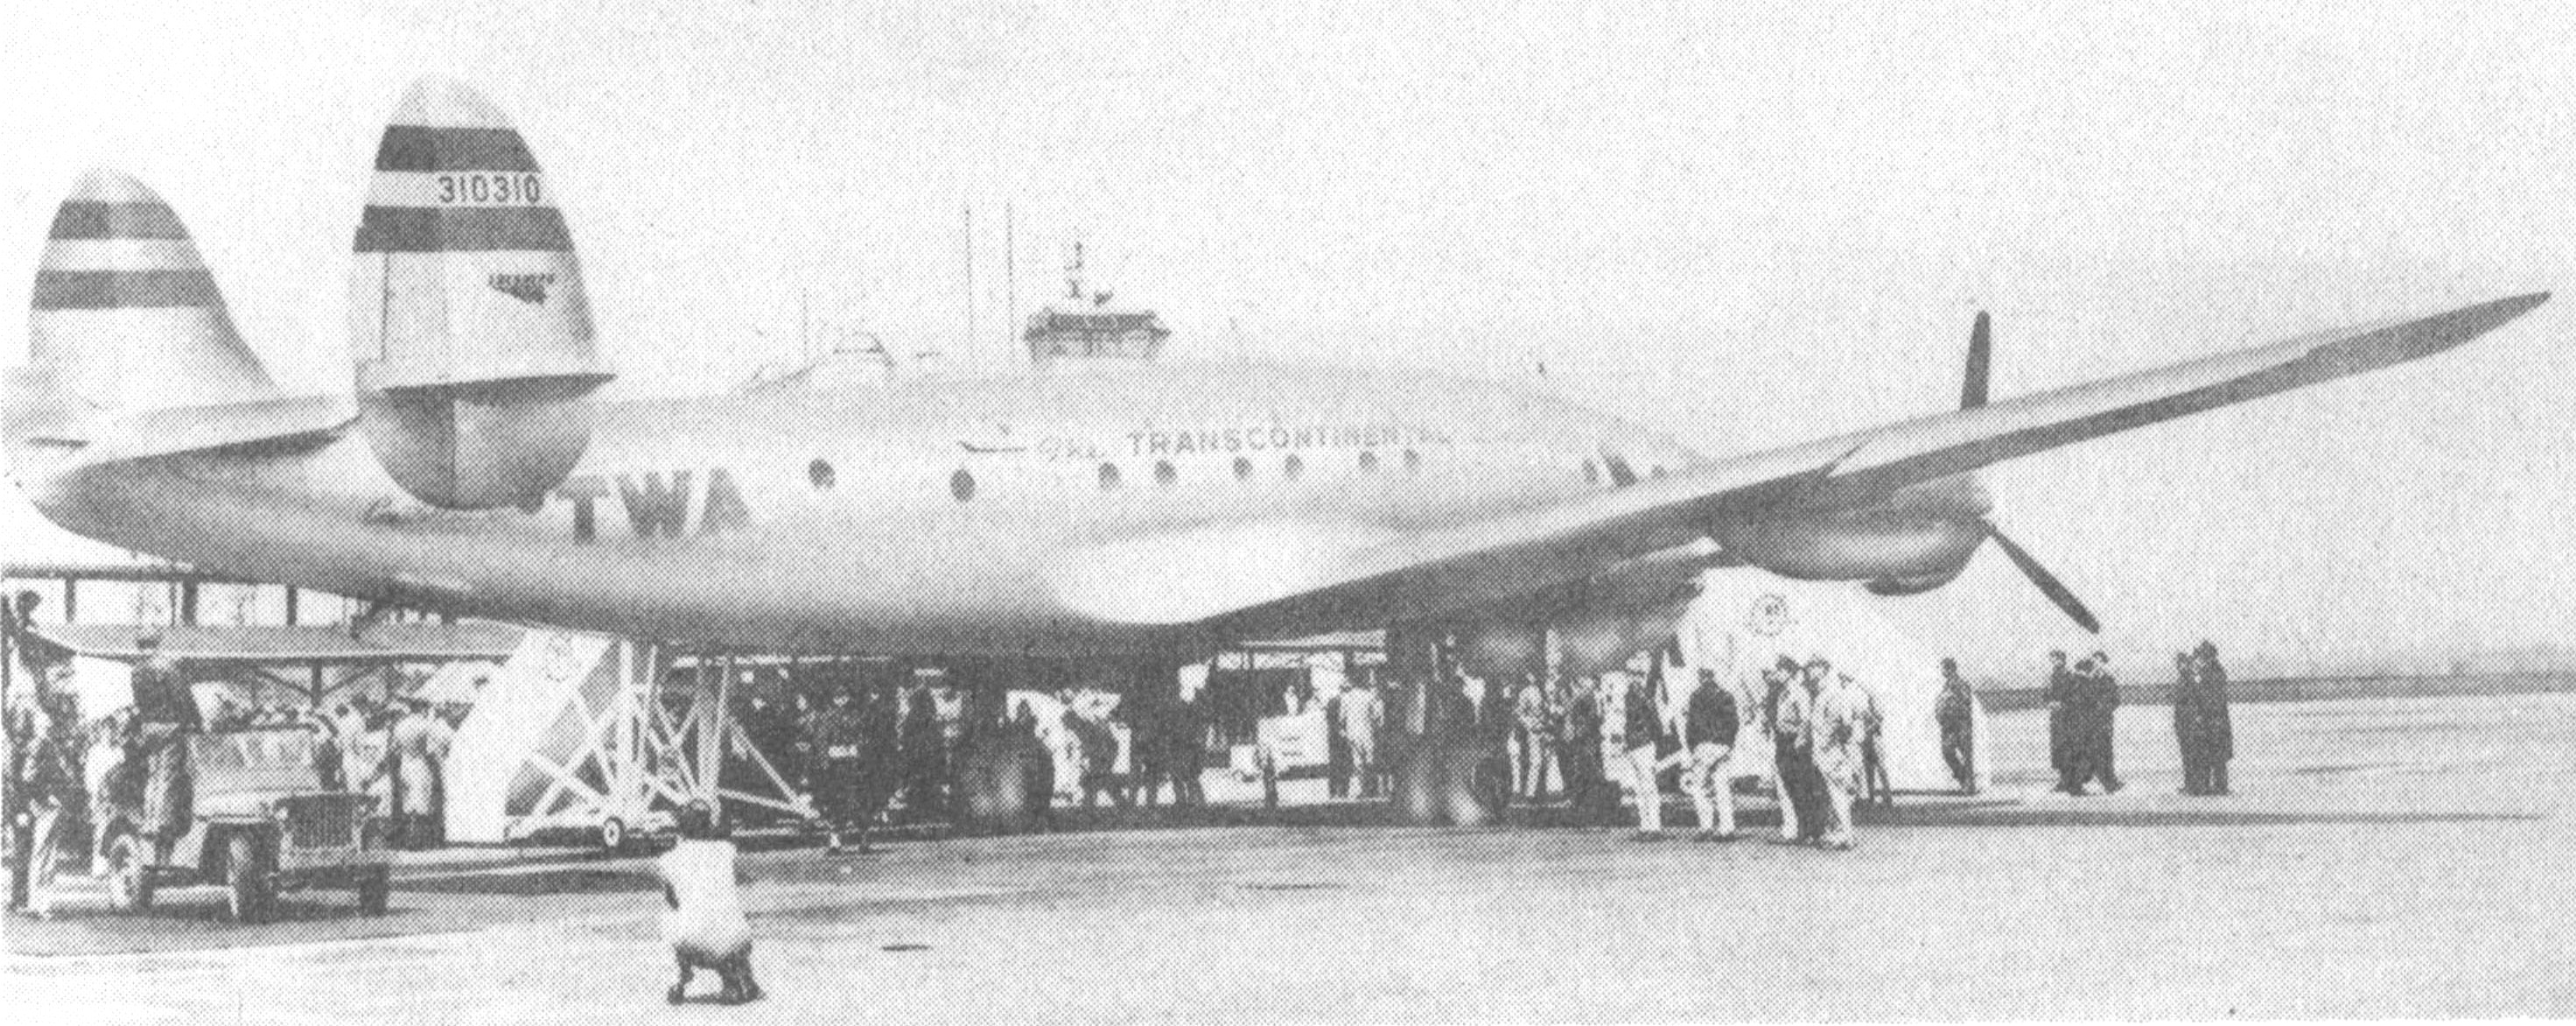 A Lockheed Constellation, with 62 passenger capacity shows progress in air travel 25 years later.